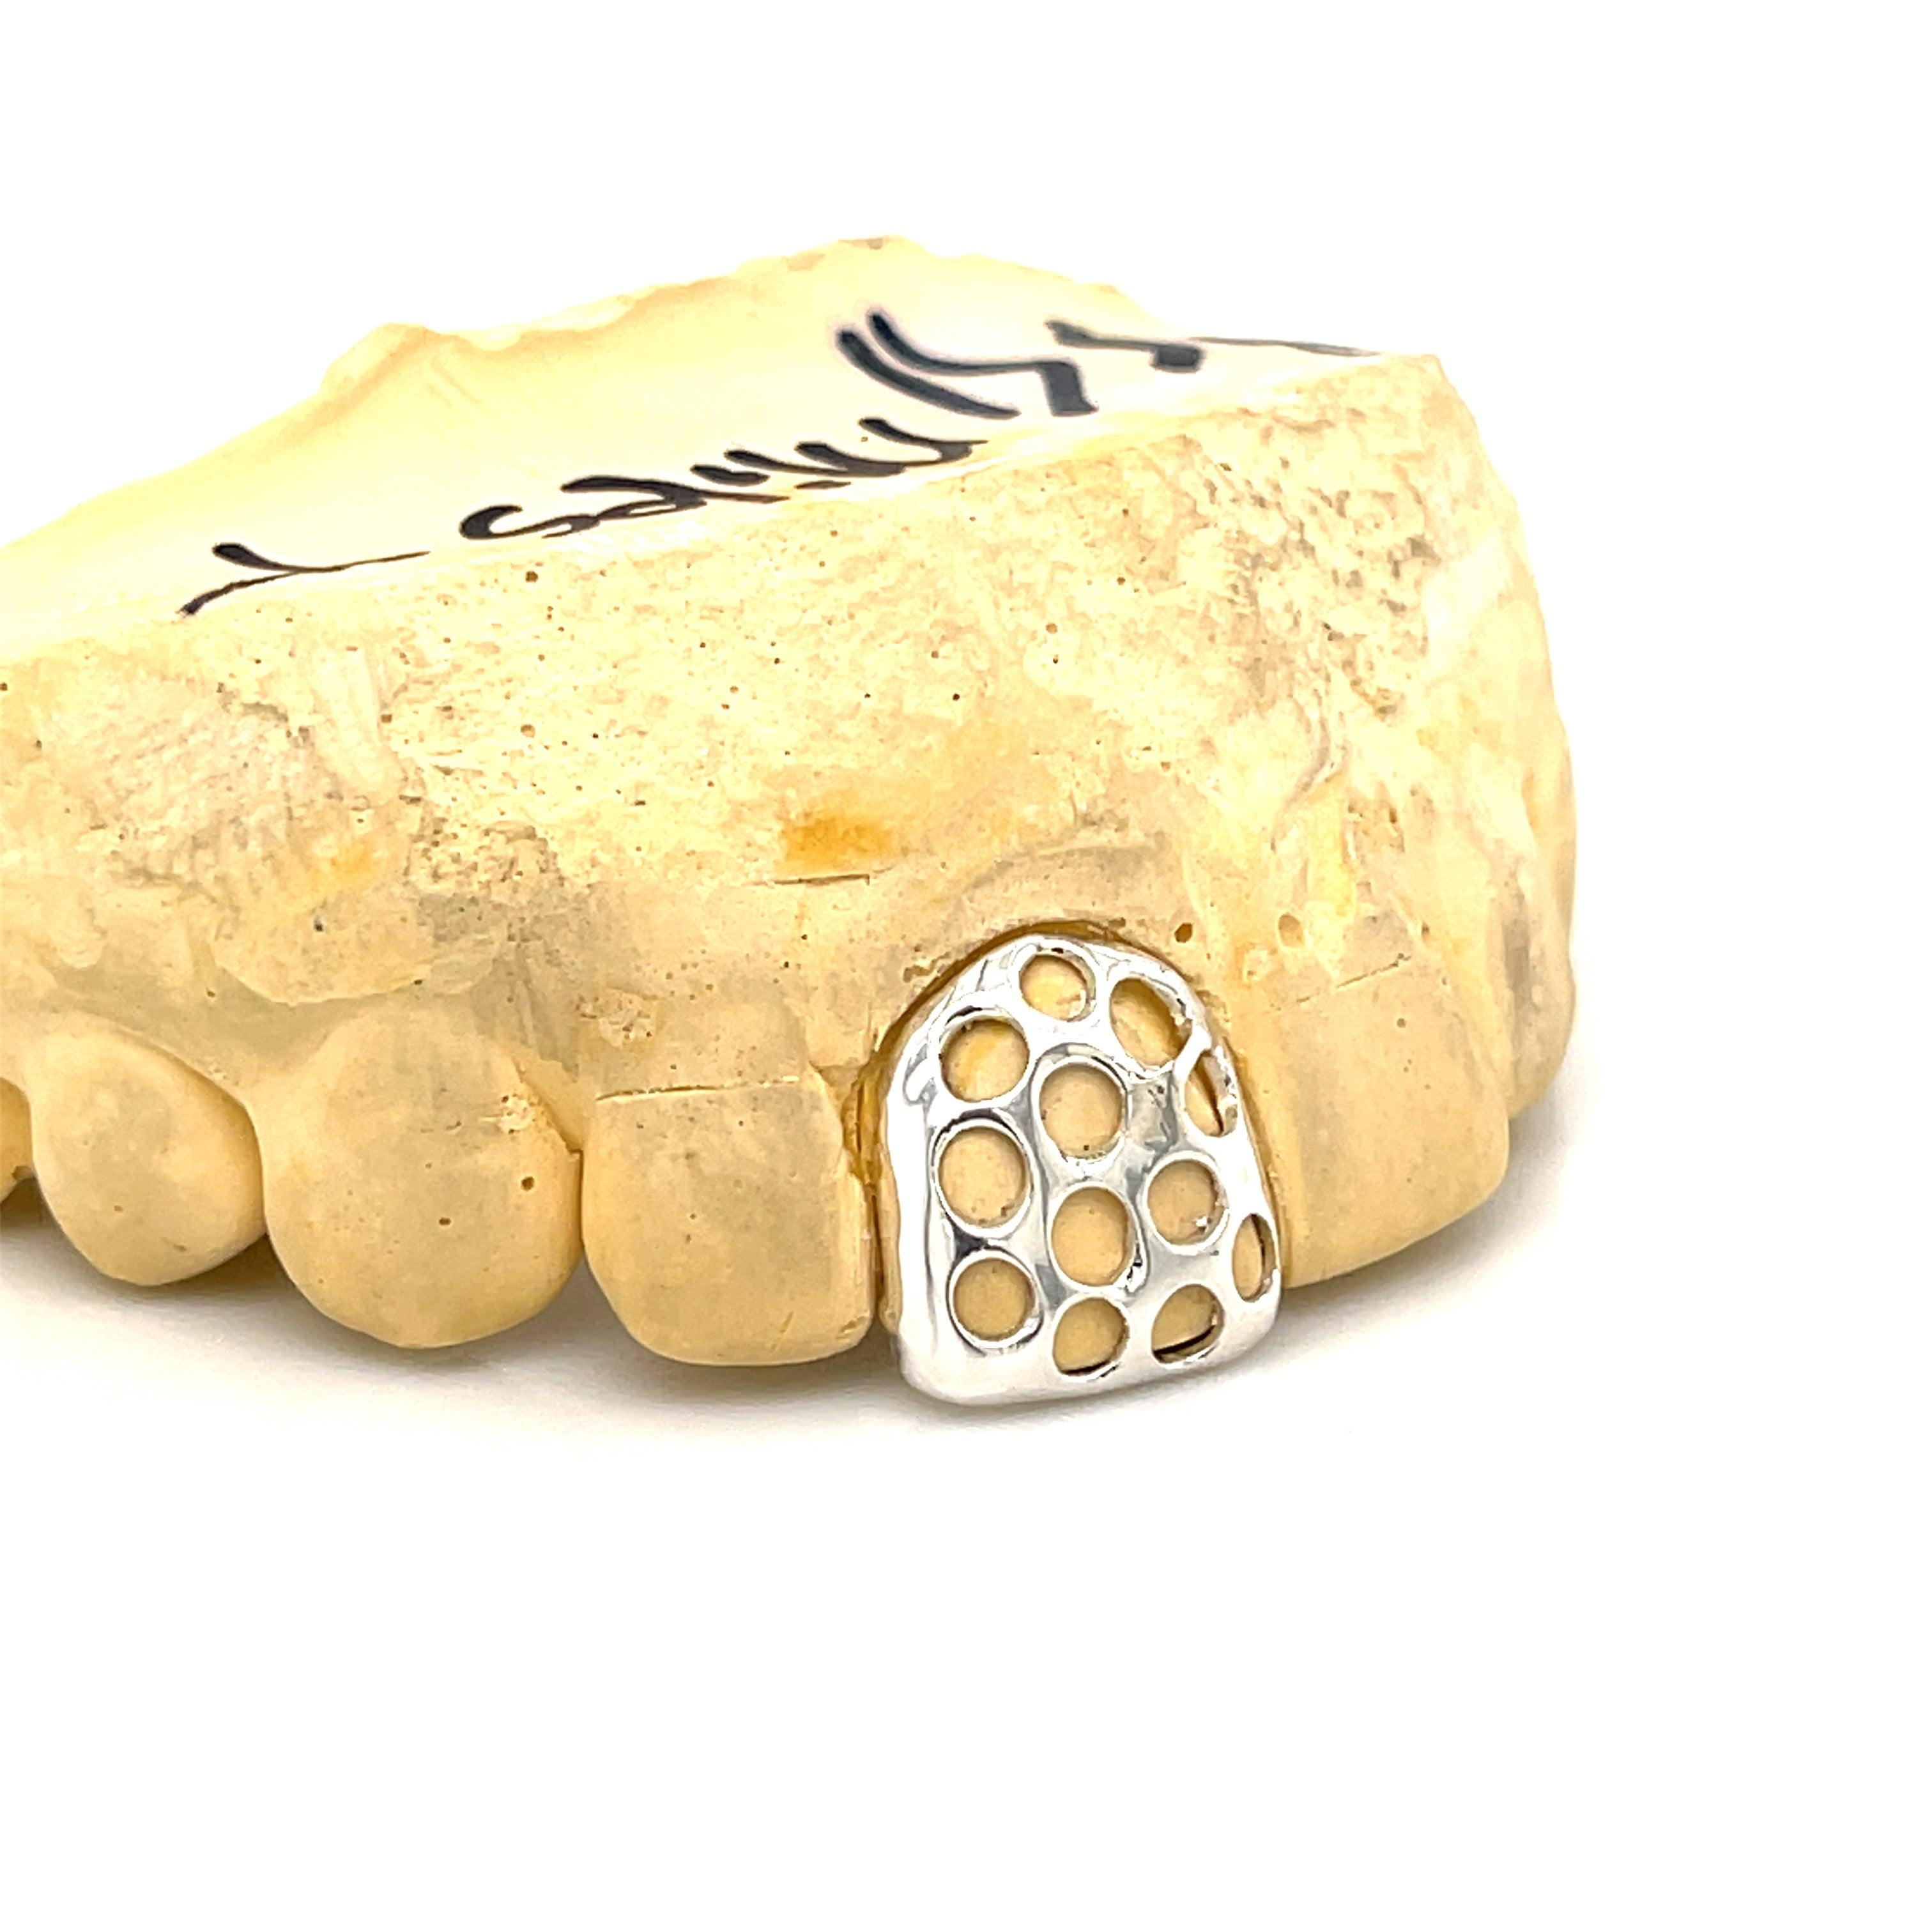 1pc Silver Cheese Grater Grillz